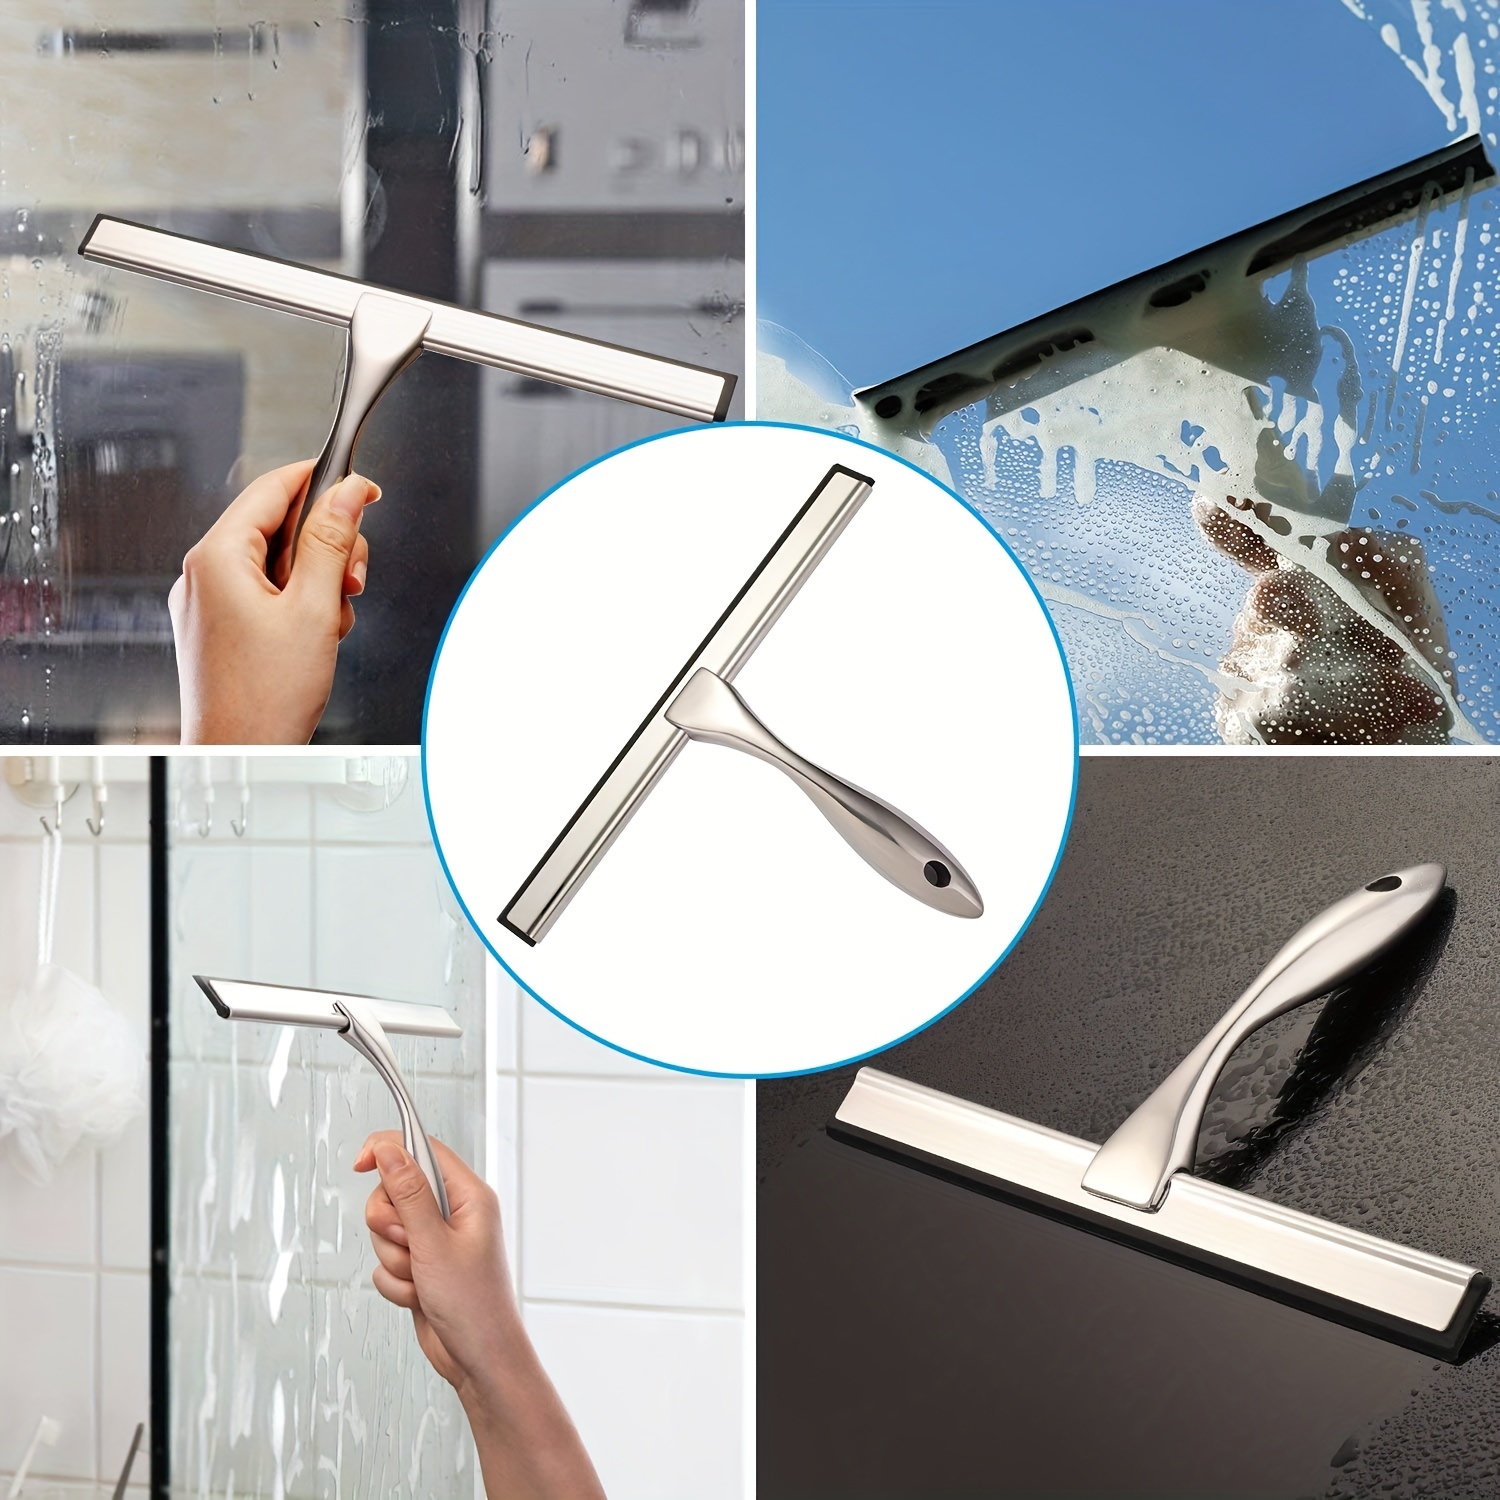 All-Purpose Shower Squeegee for Shower Doors, Bathroom, Window and Car  Glass